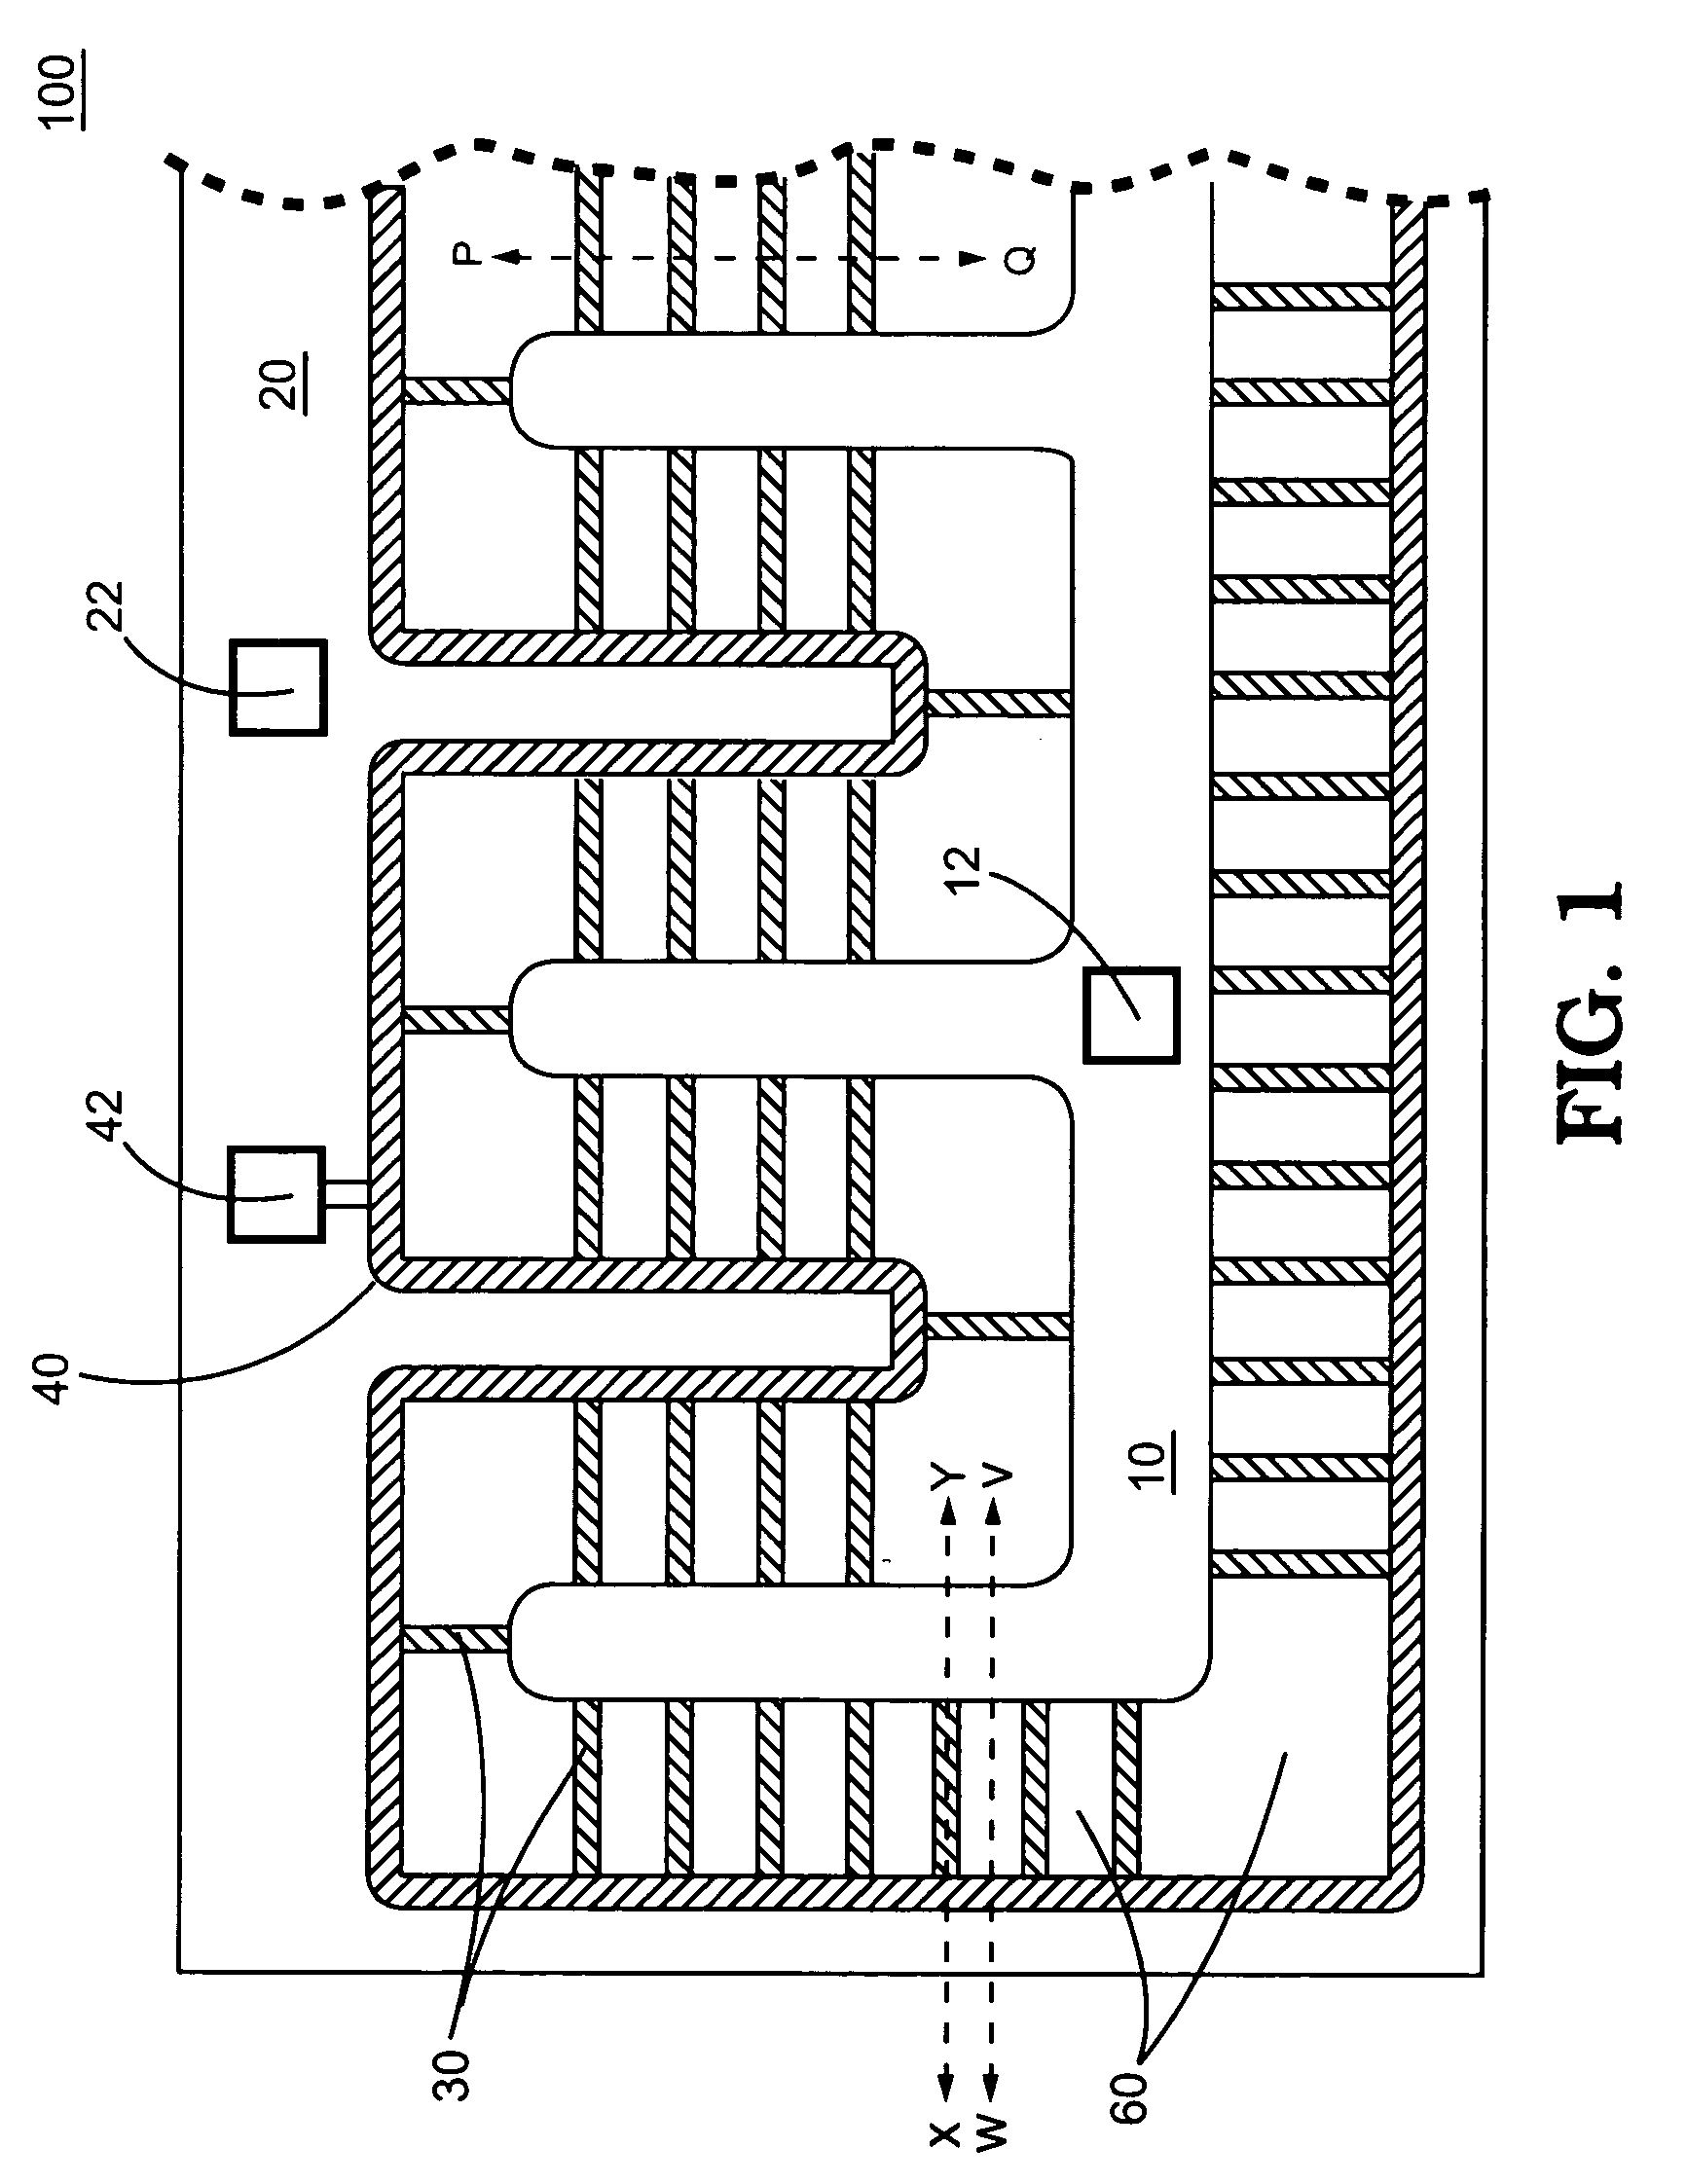 Isolated high-voltage LDMOS transistor having a split well structure